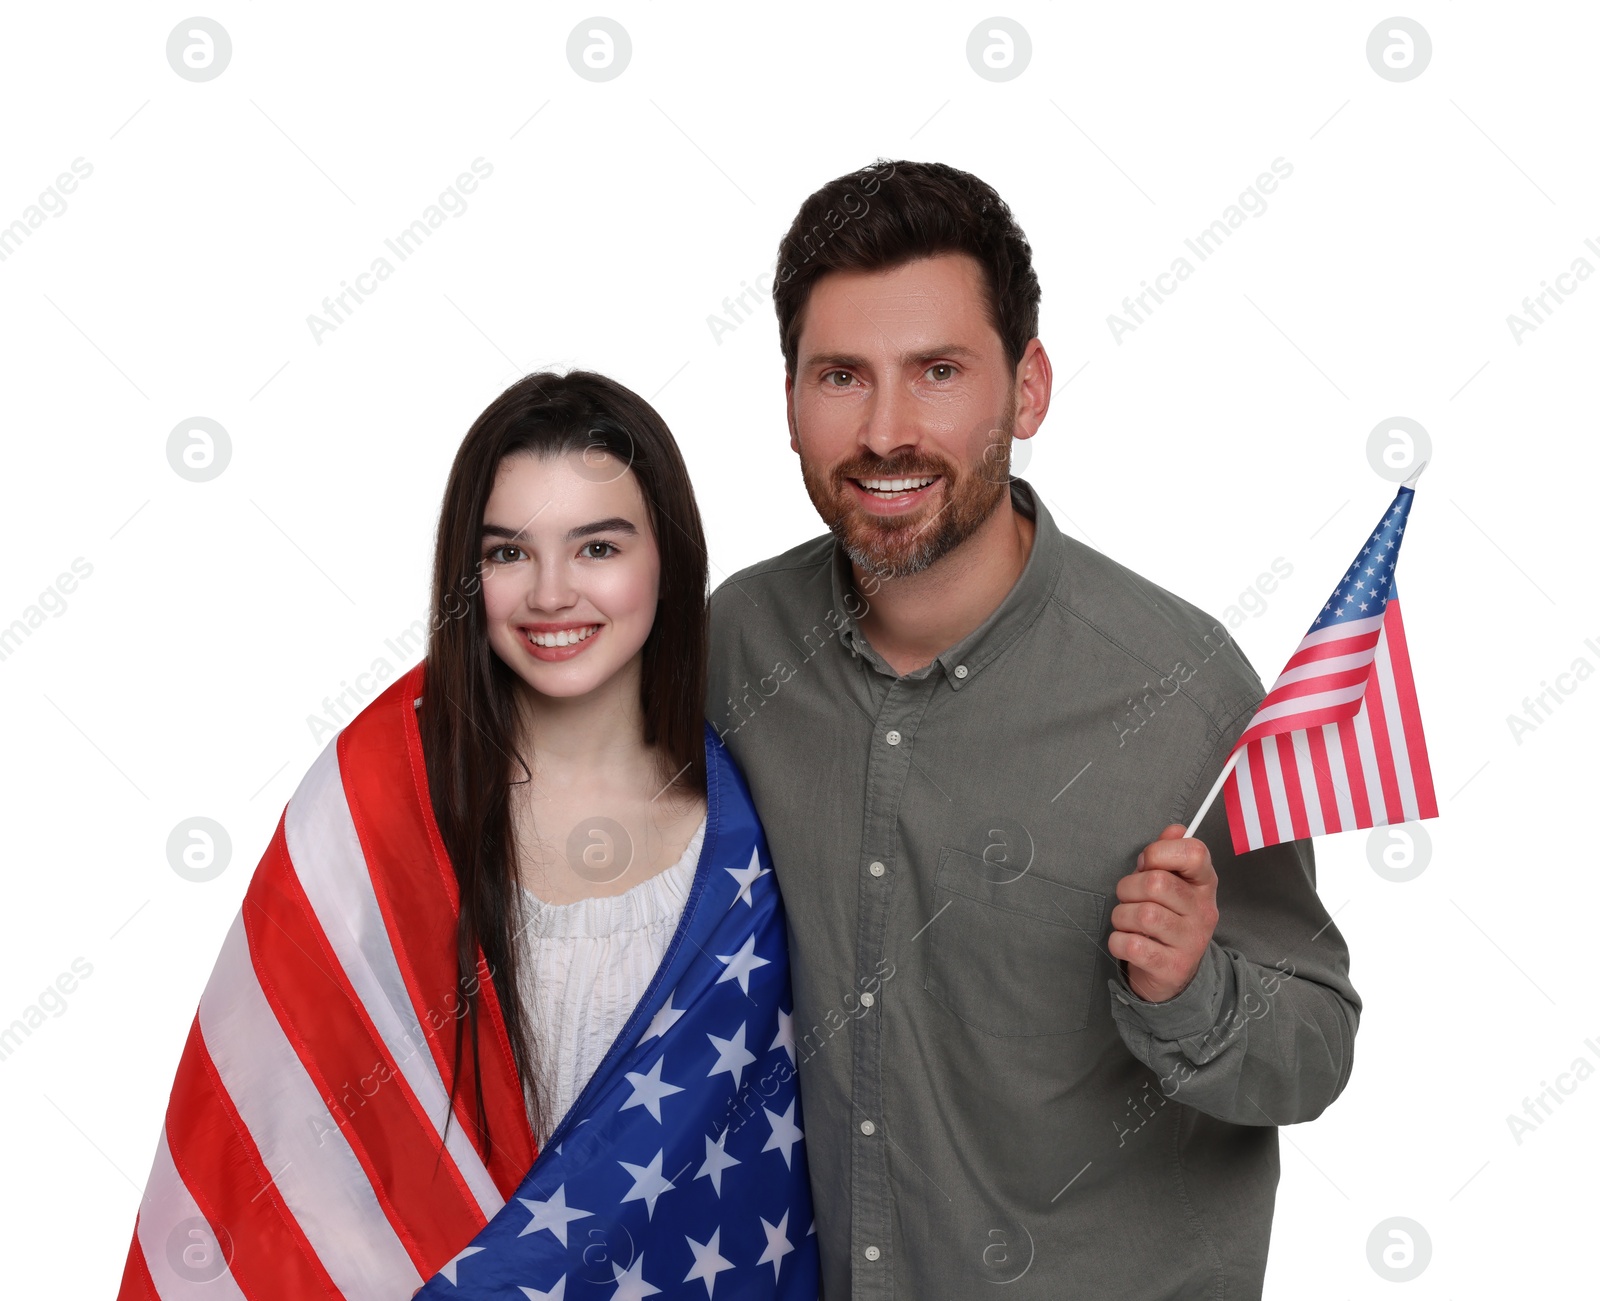 Image of 4th of July - Independence day of America. Happy father and his daughter with national flags of United States on white background